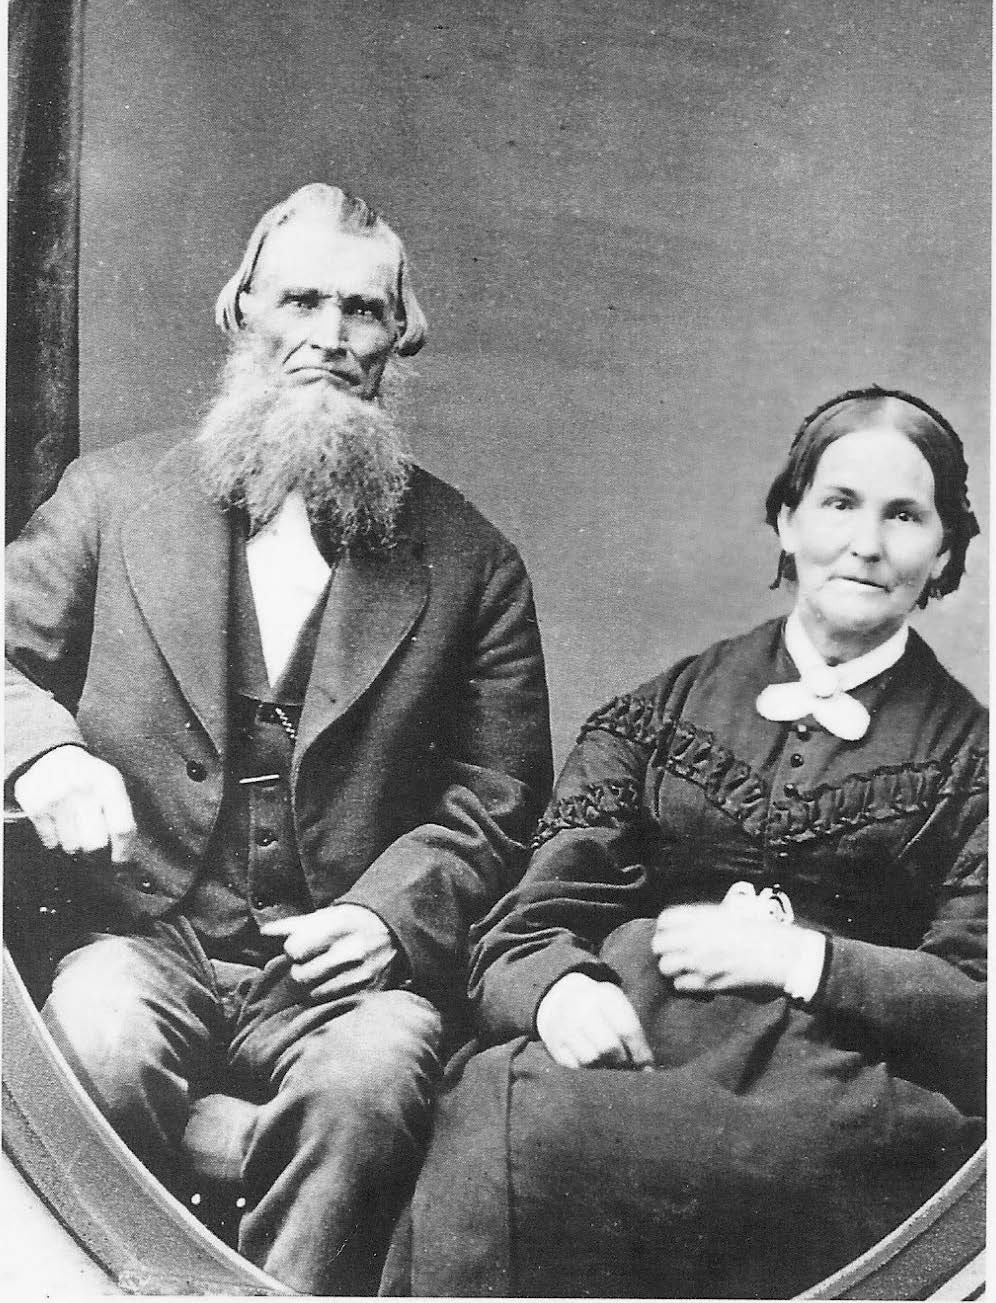 Israel and Elizabeth Barlow courageously sacrificed throughout their lives to build up Zion’s theodemocracy. Courtesy of Israel Barlow Family Association.